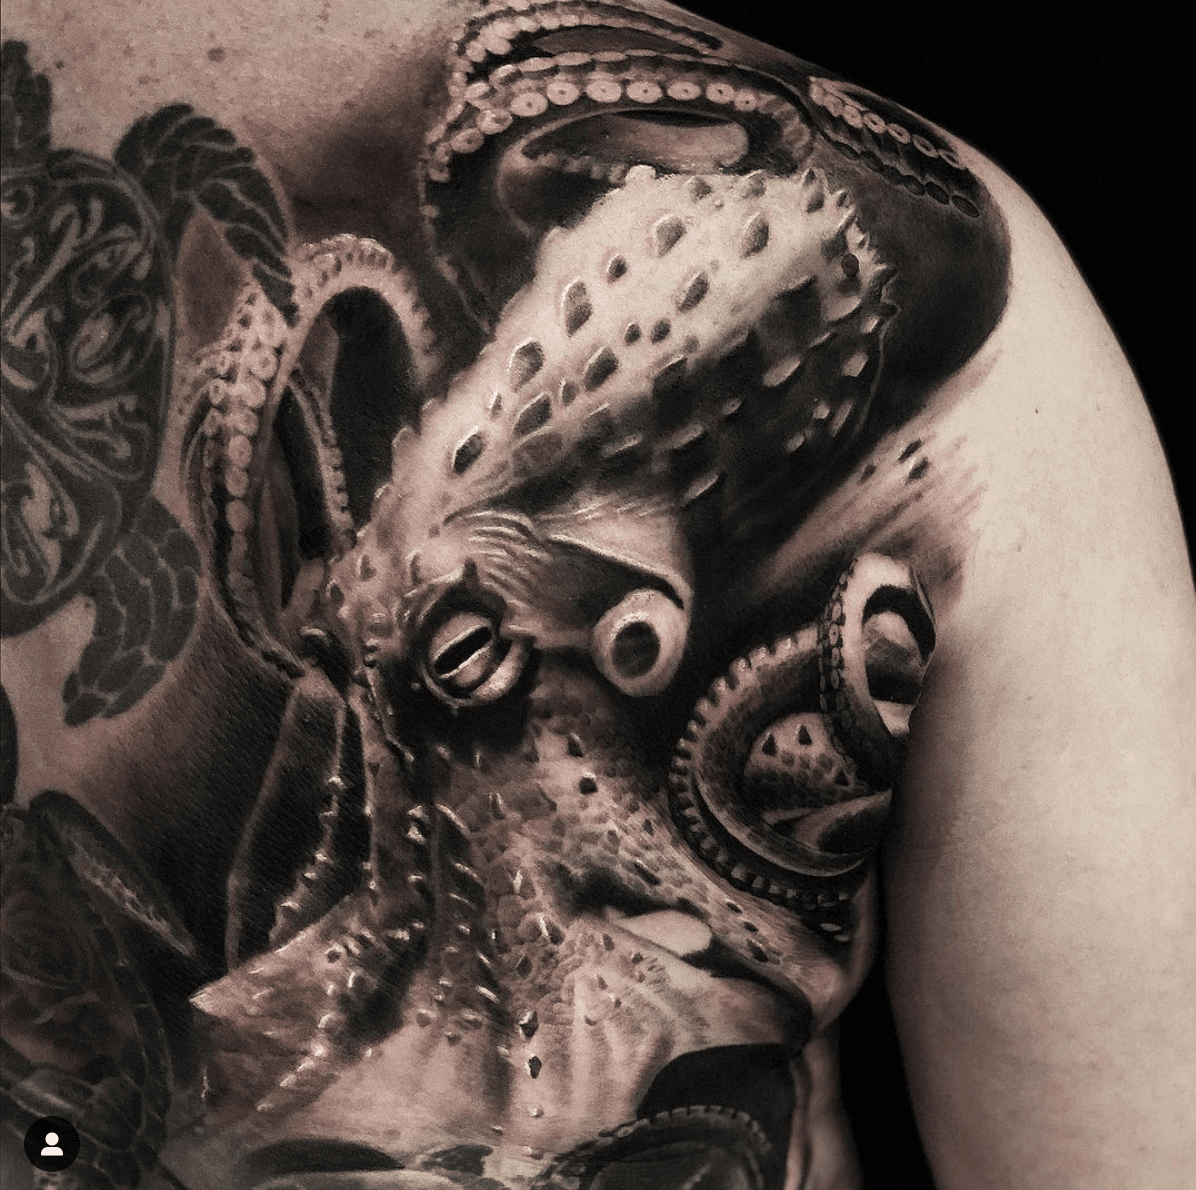 Incredible Octopus coverup tattoo by Meghan Patrick 12ozstudios  team12oz tattoos tattooartist coverup octopus tat  Cover up tattoo  Drum tattoo Tattoos